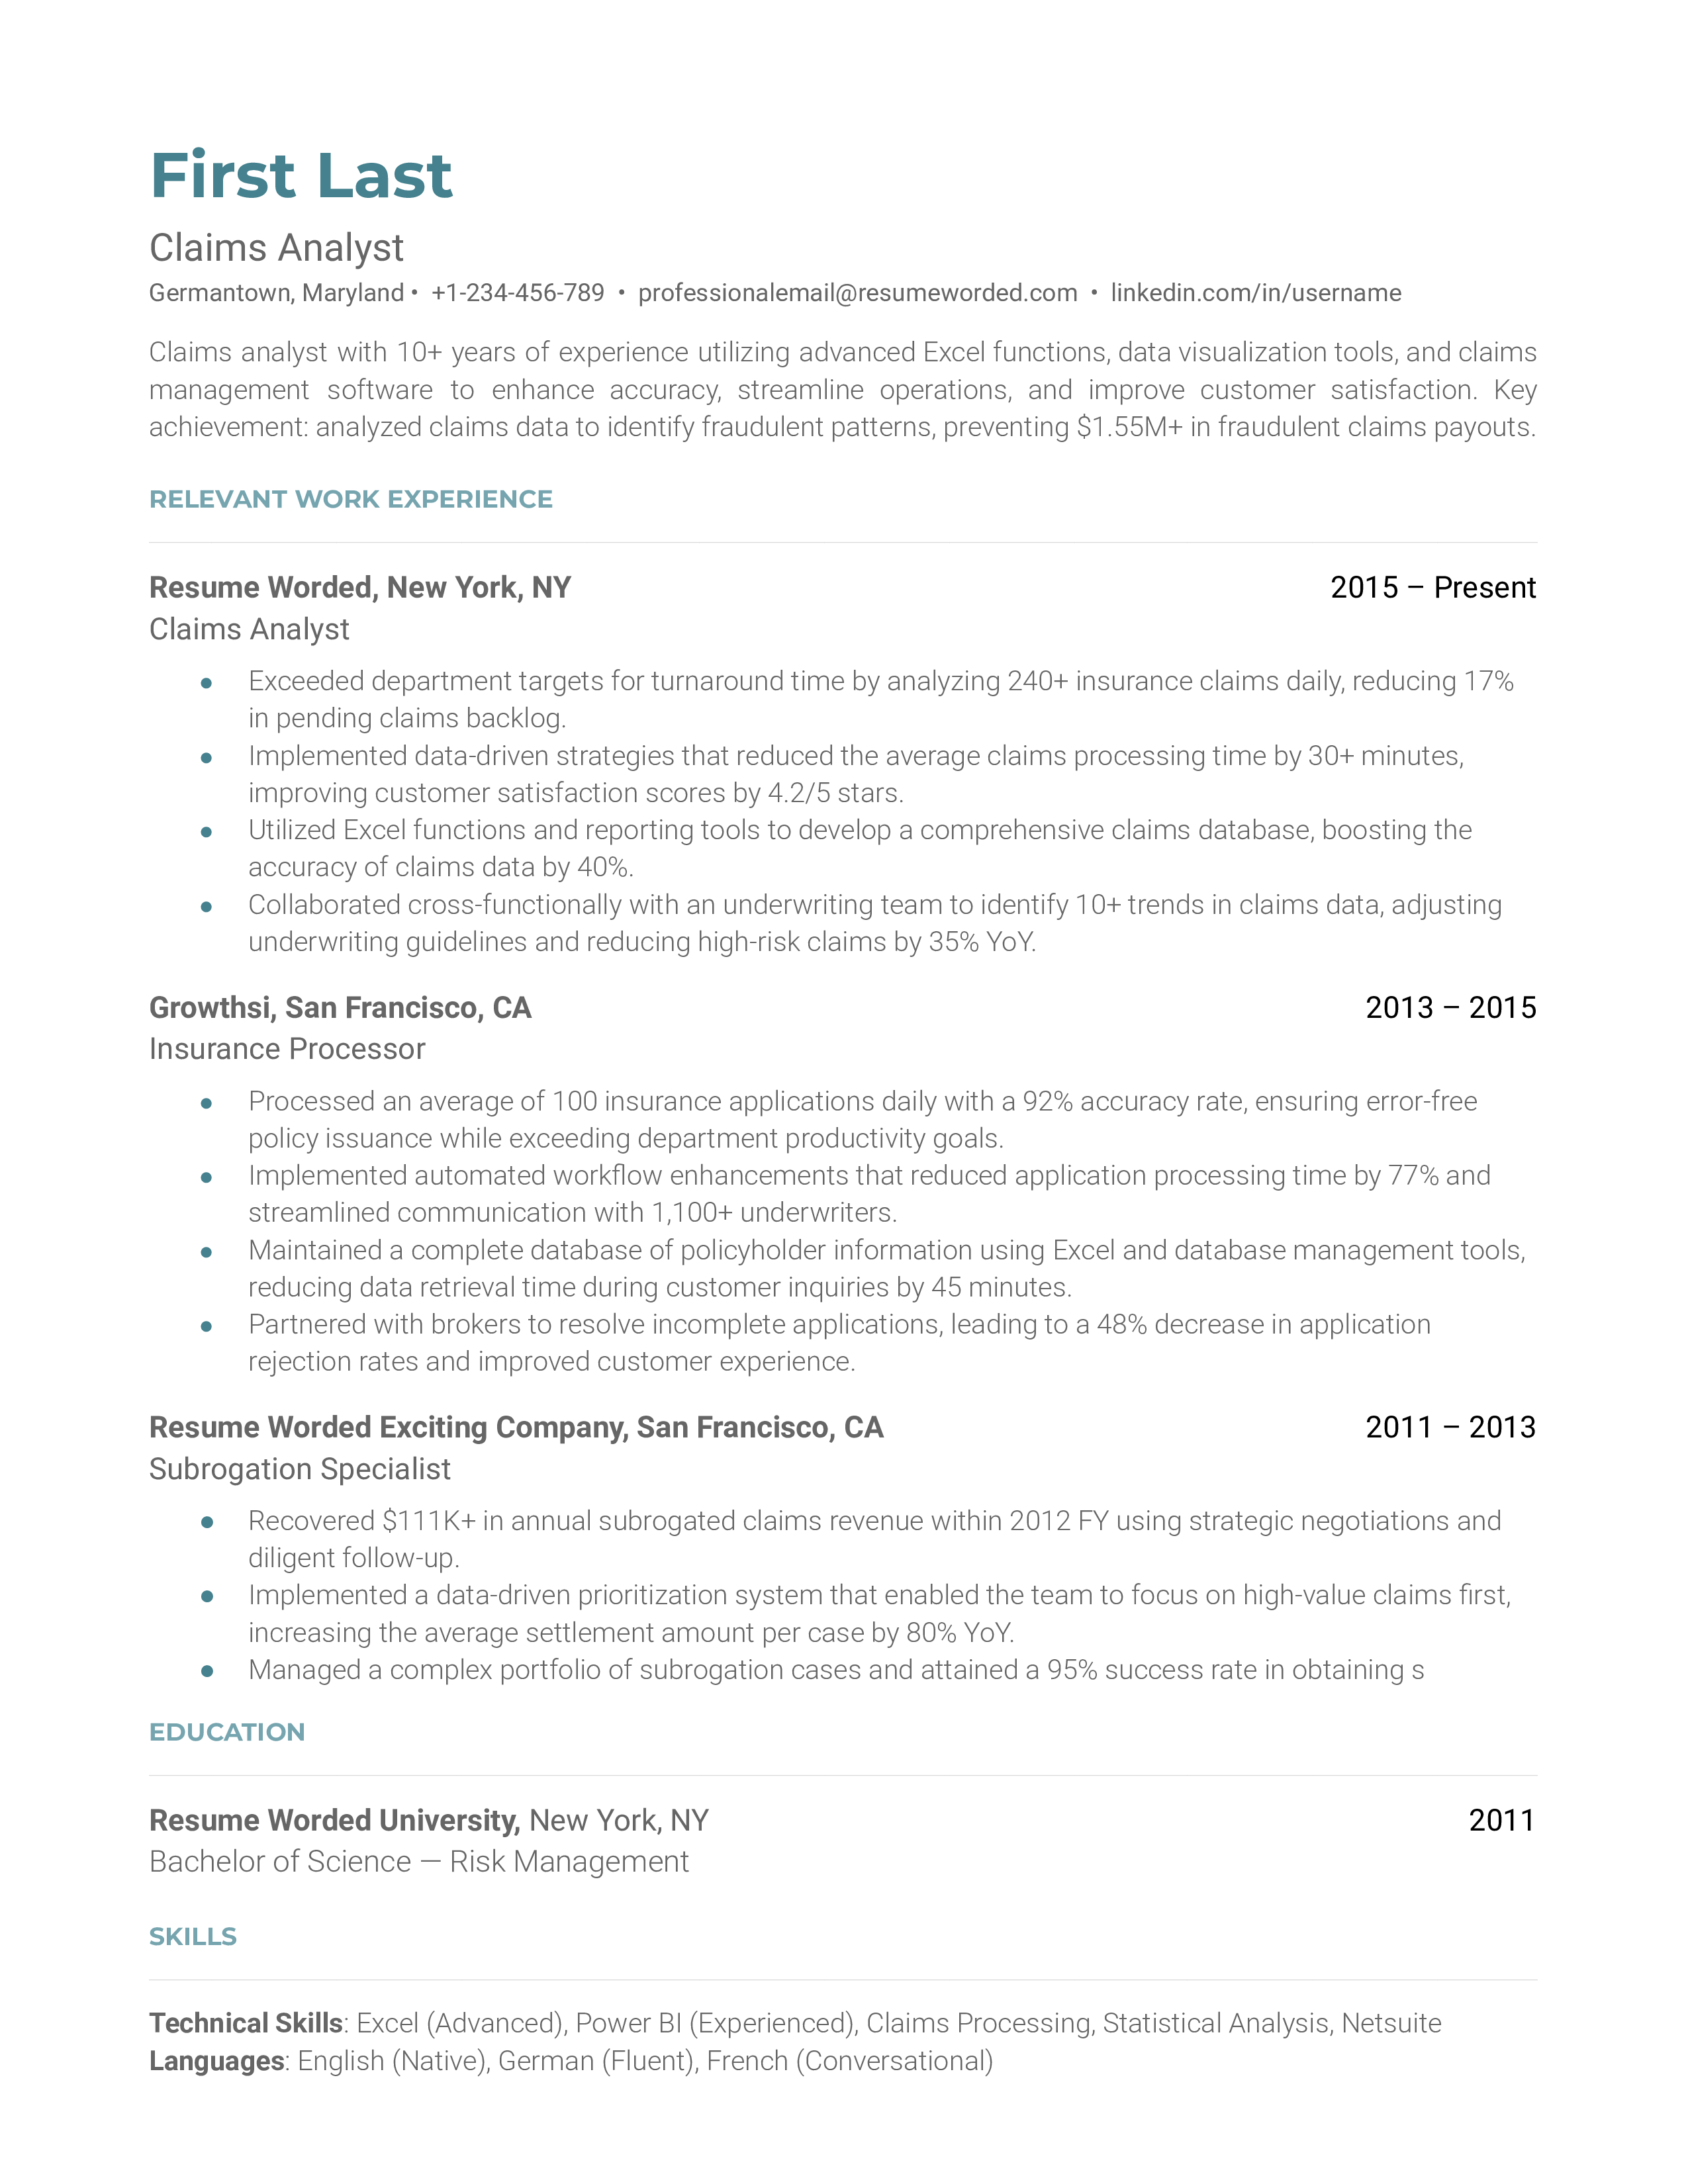 A CV for claims analyst highlighting proficiency in insurance software and understanding of claims process.